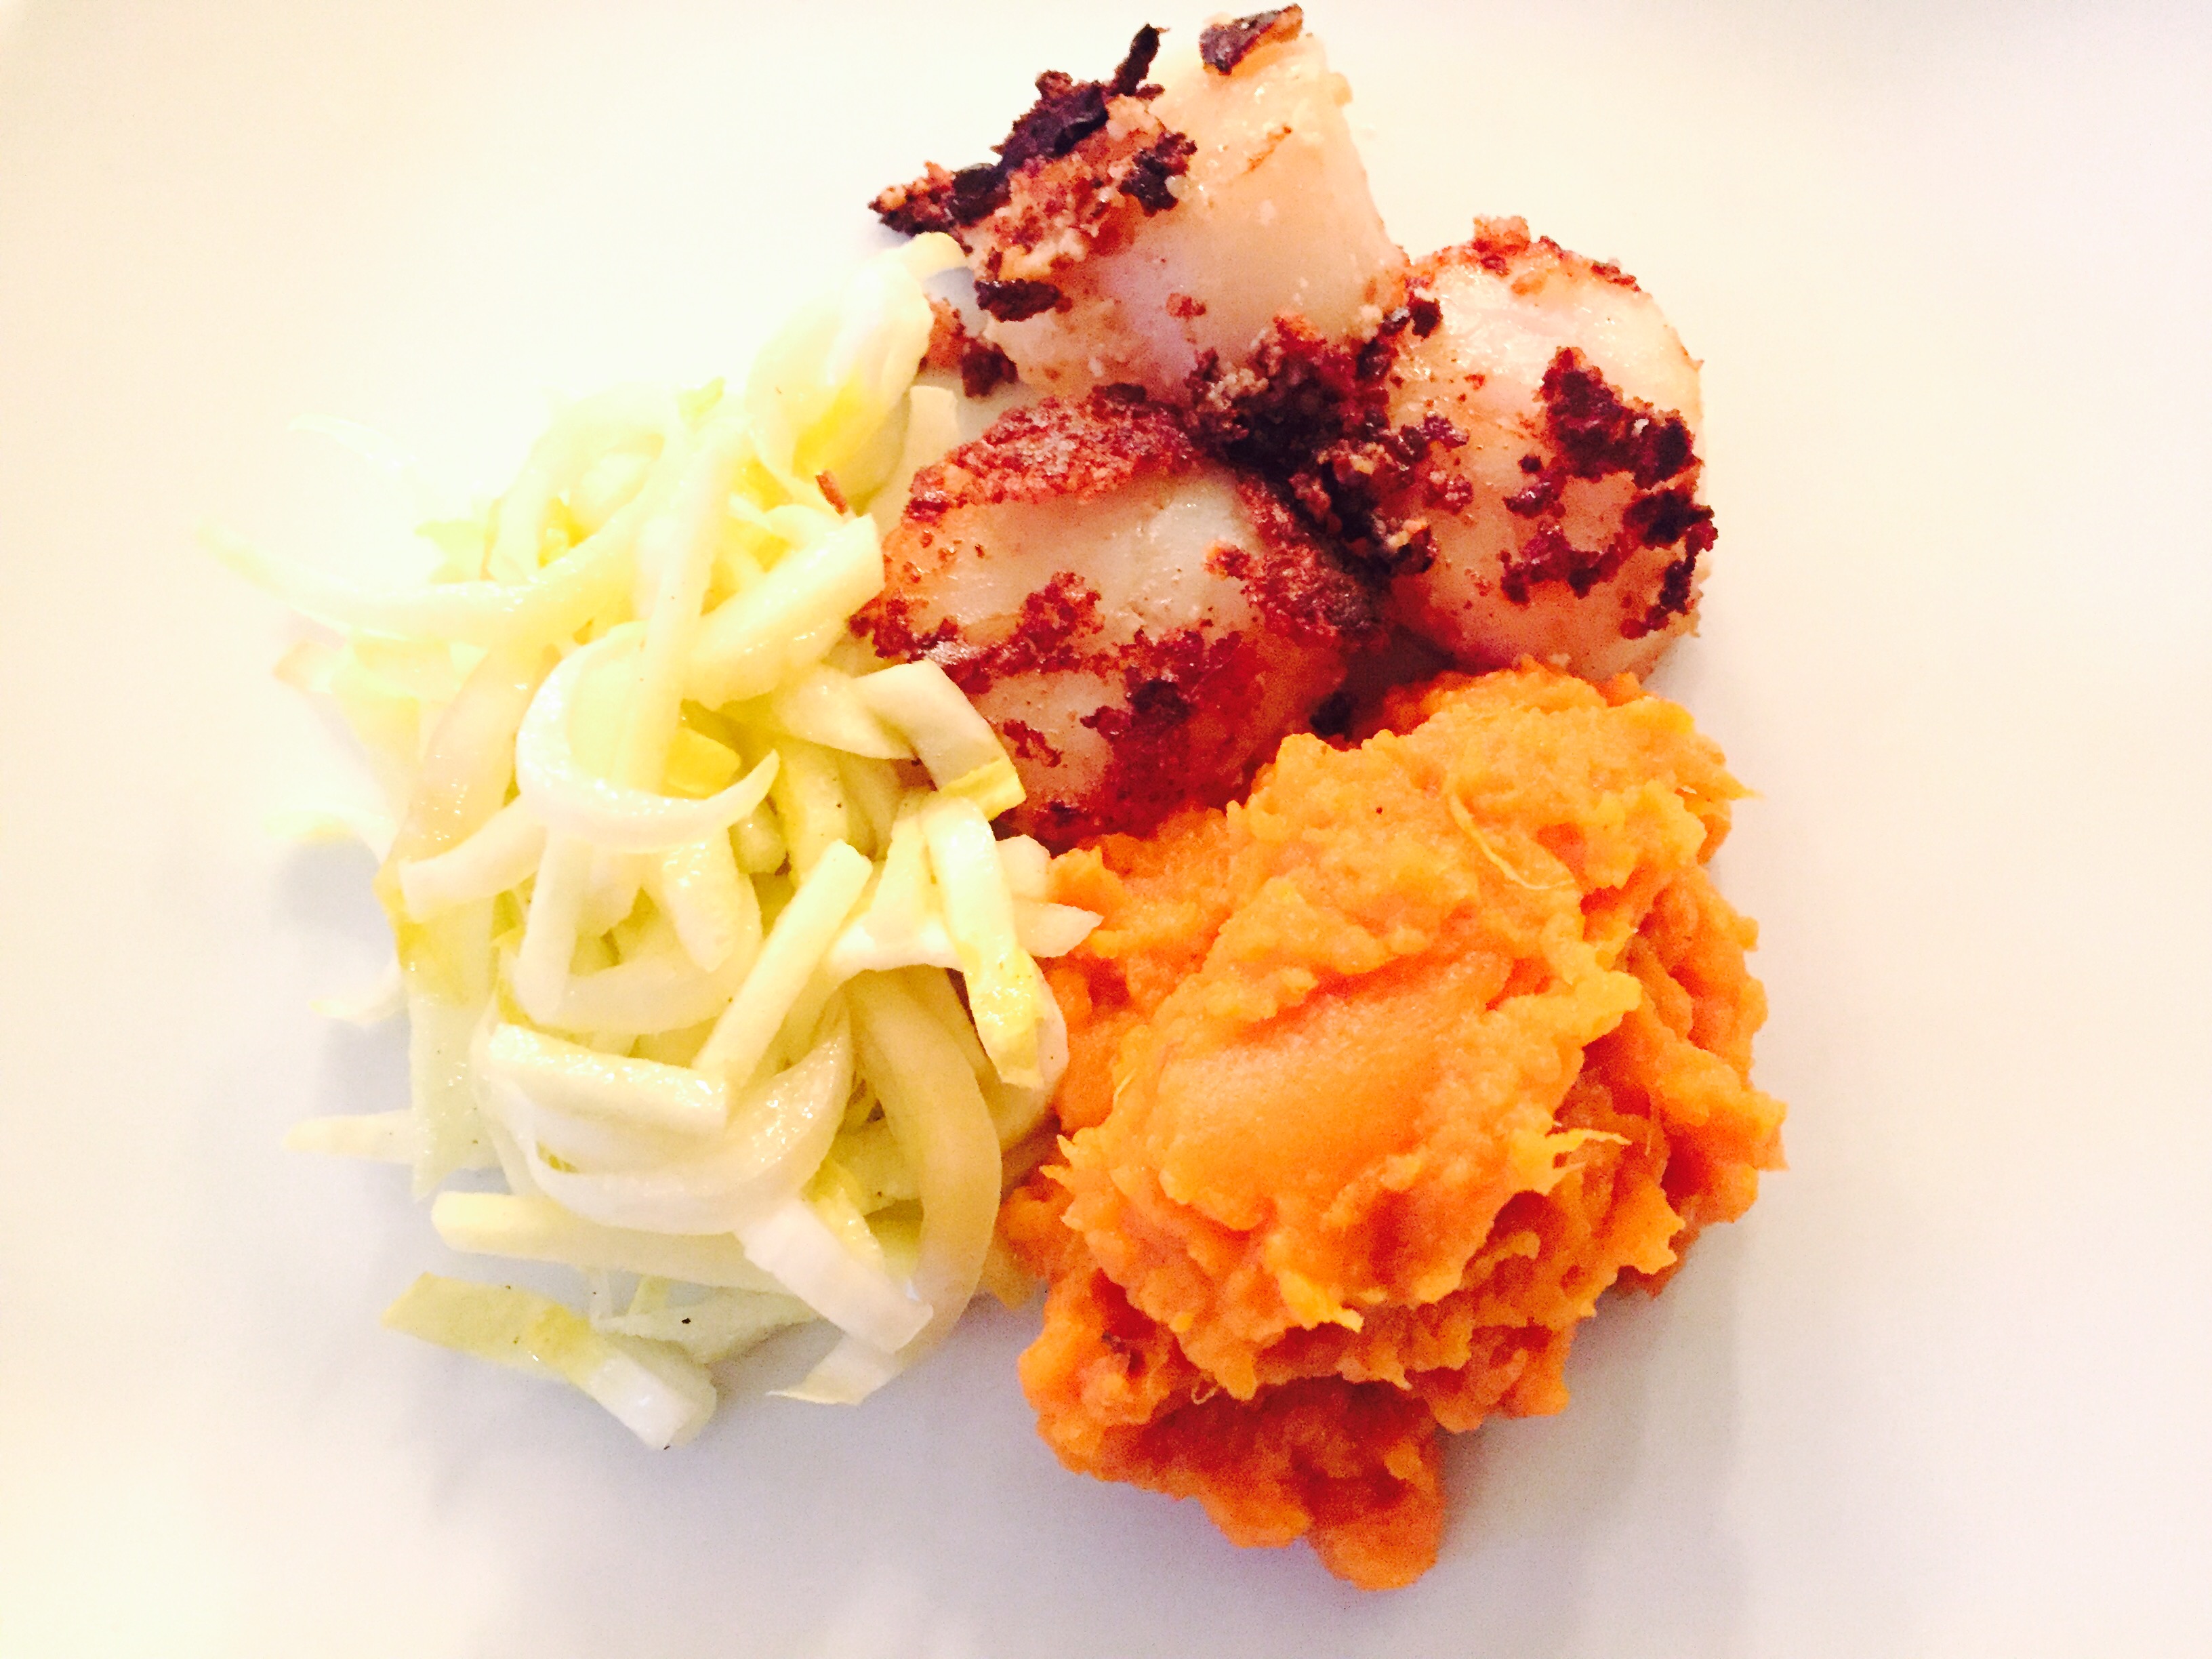 Lemon butter breaded scallops with sun dried tomato & sweet potato puree and apple endive coleslaw